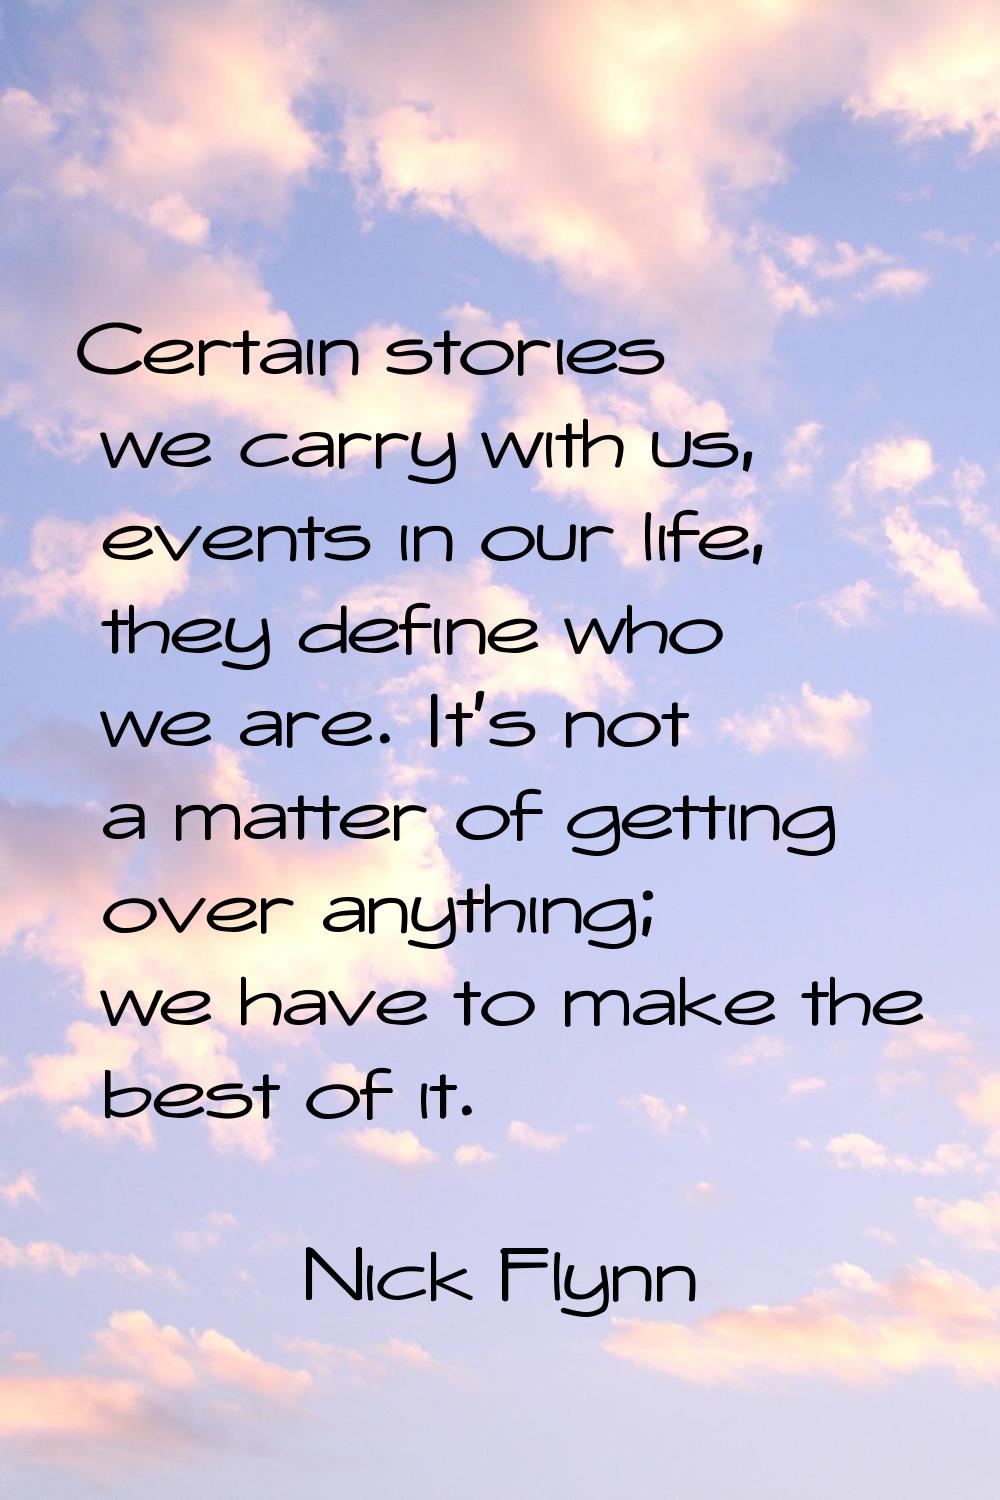 Certain stories we carry with us, events in our life, they define who we are. It's not a matter of 